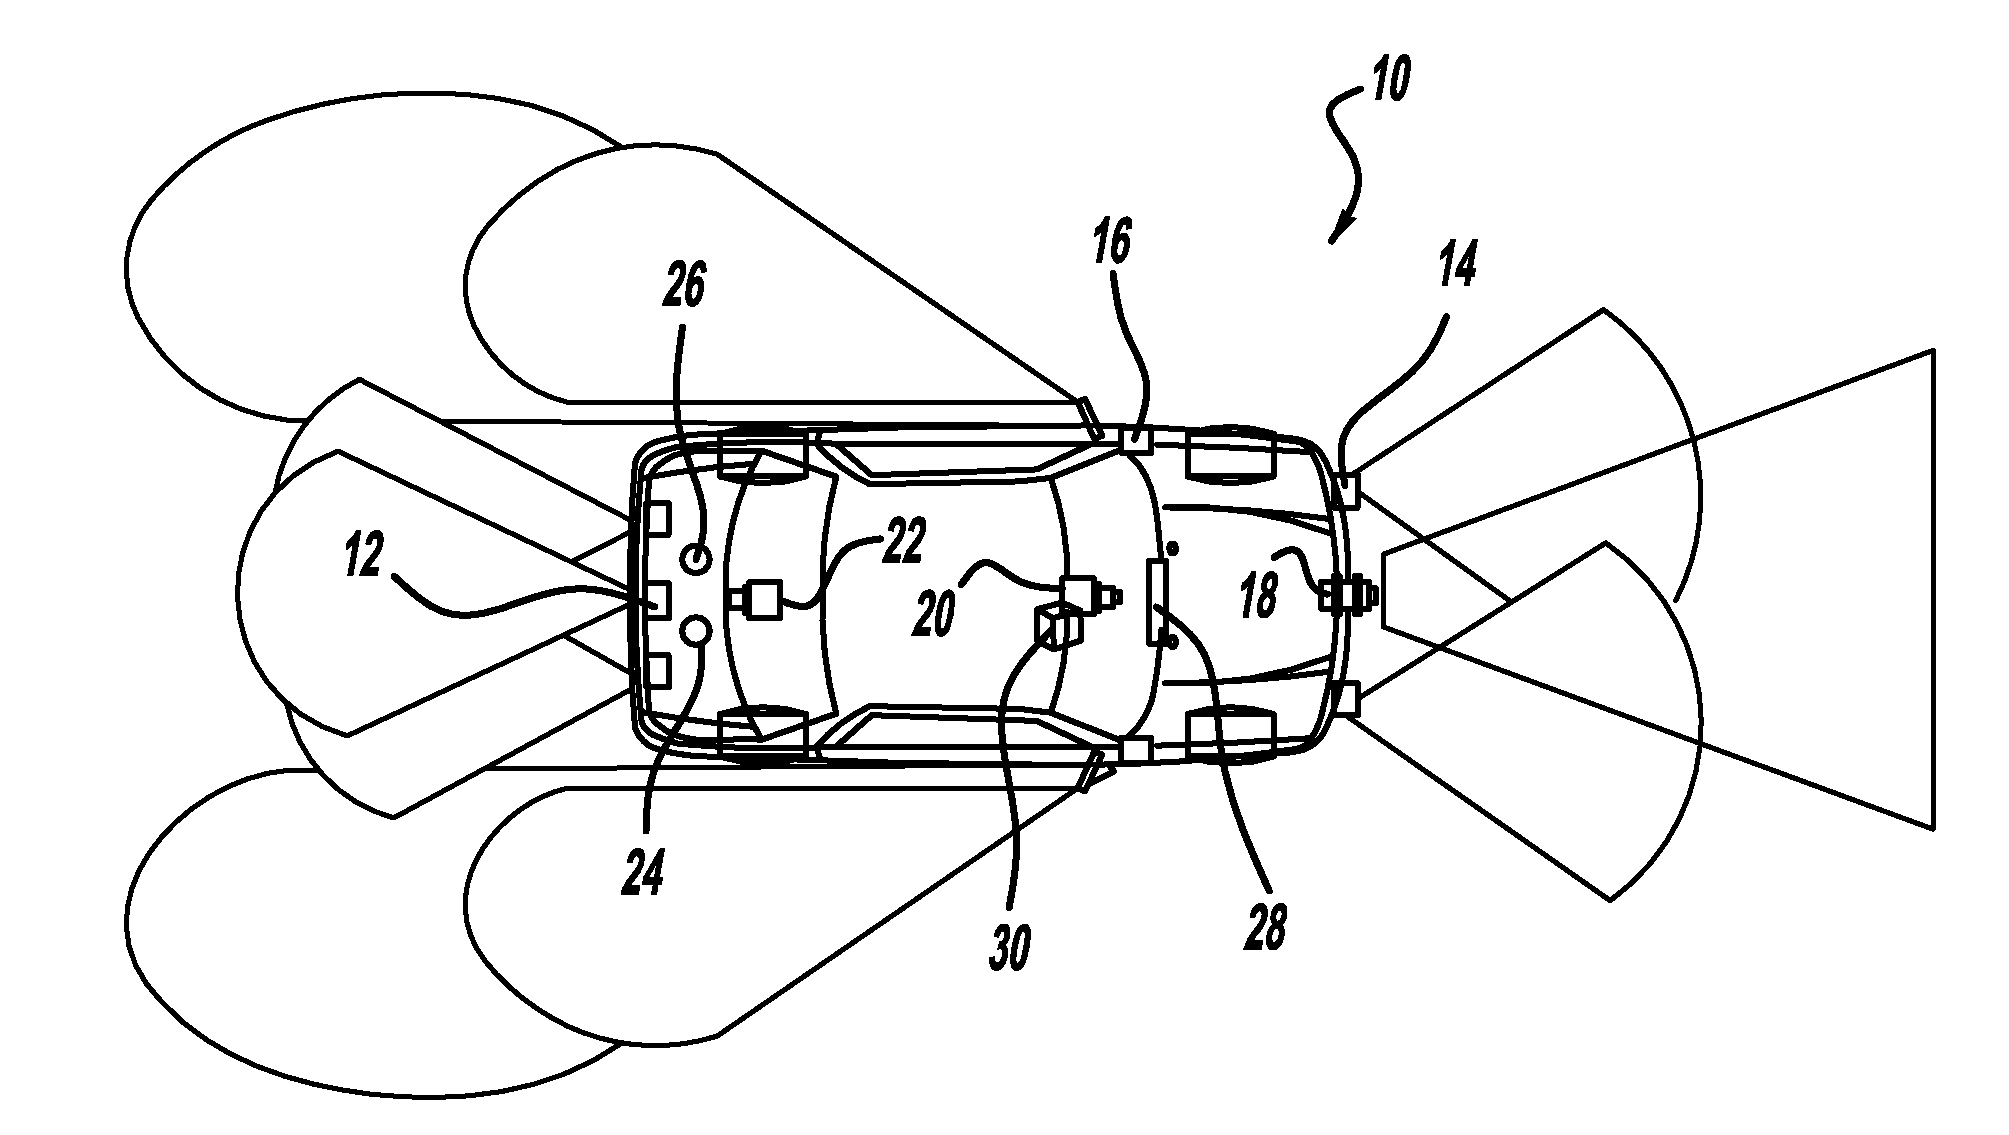 Adaptive vehicle control system with driving style recognition based on lane-change maneuvers